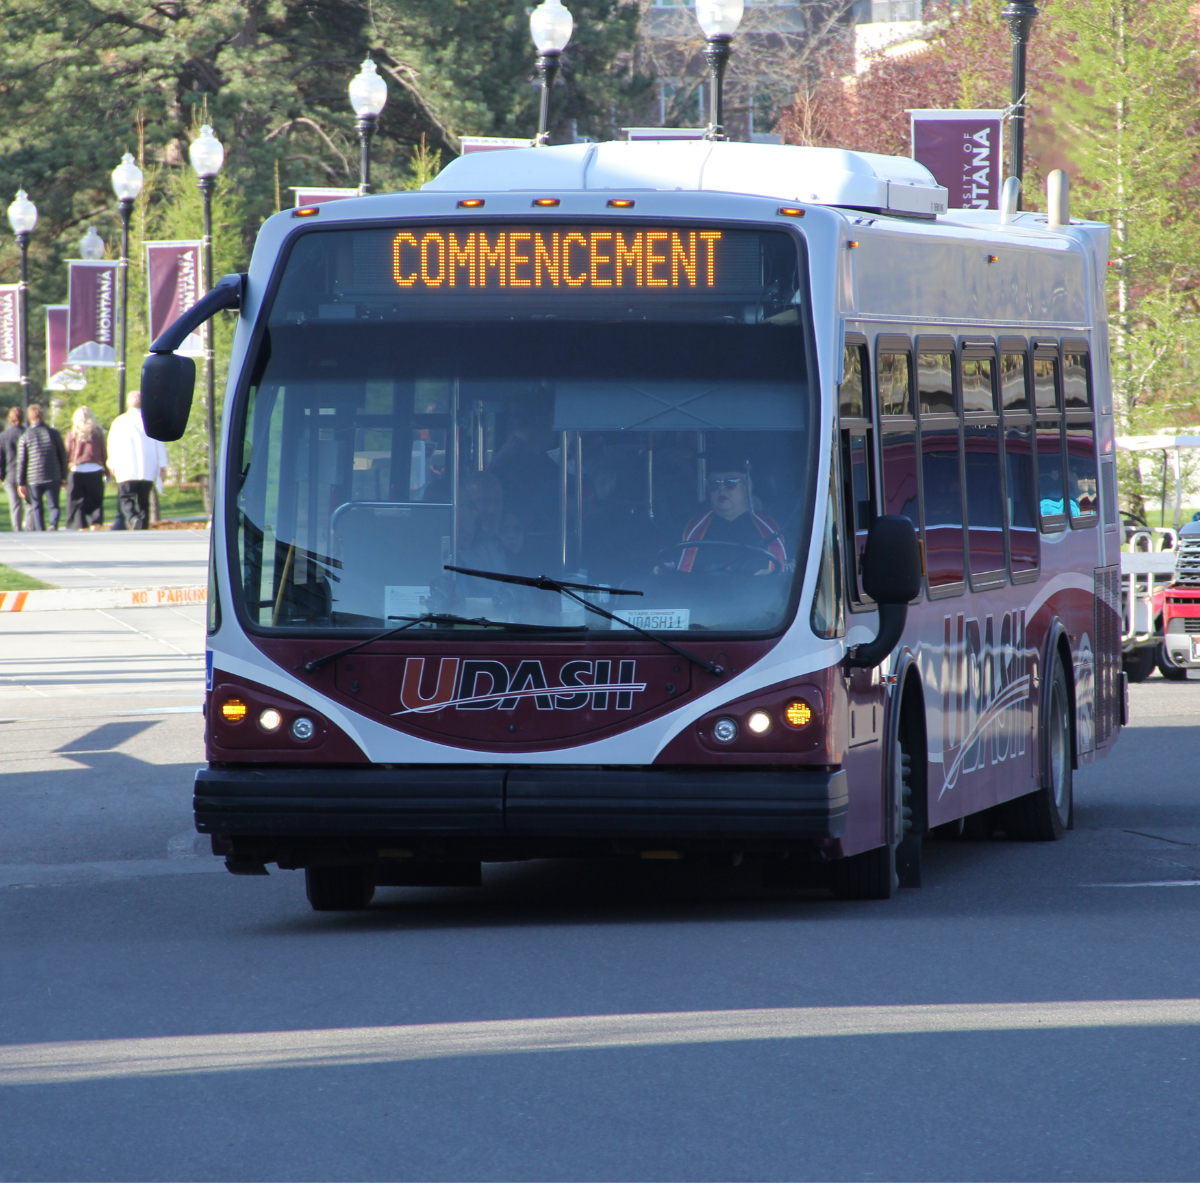 UDASH Bus with Commencement Heading